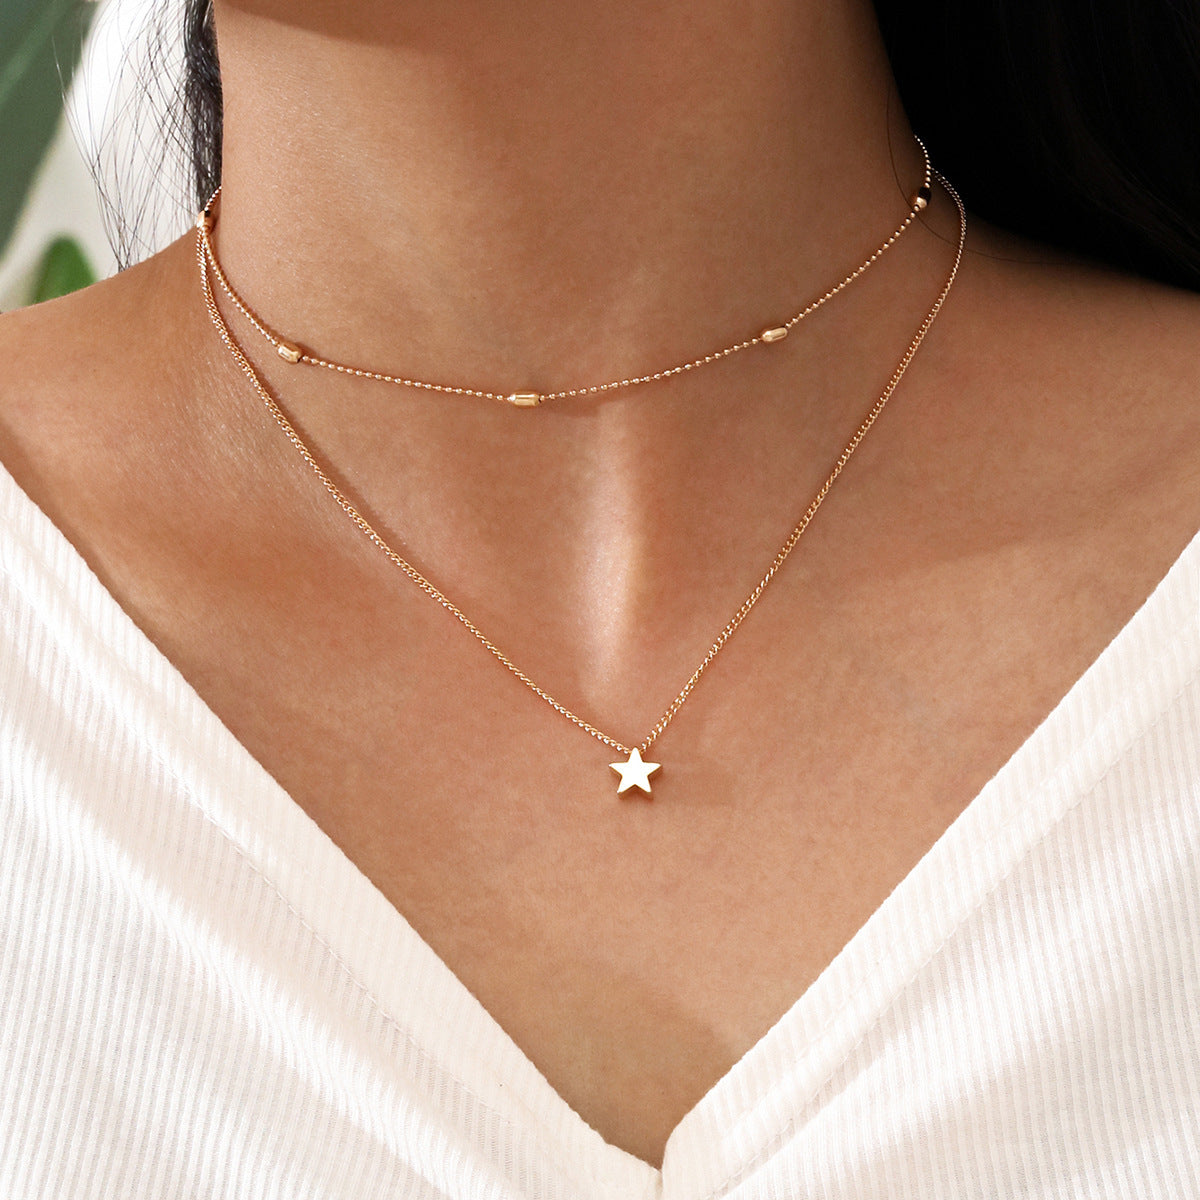 Arzonai European and American foreign trade new product simple double layer clavicle necklace five-pointed star-shaped pendant lady necklace 1Pc